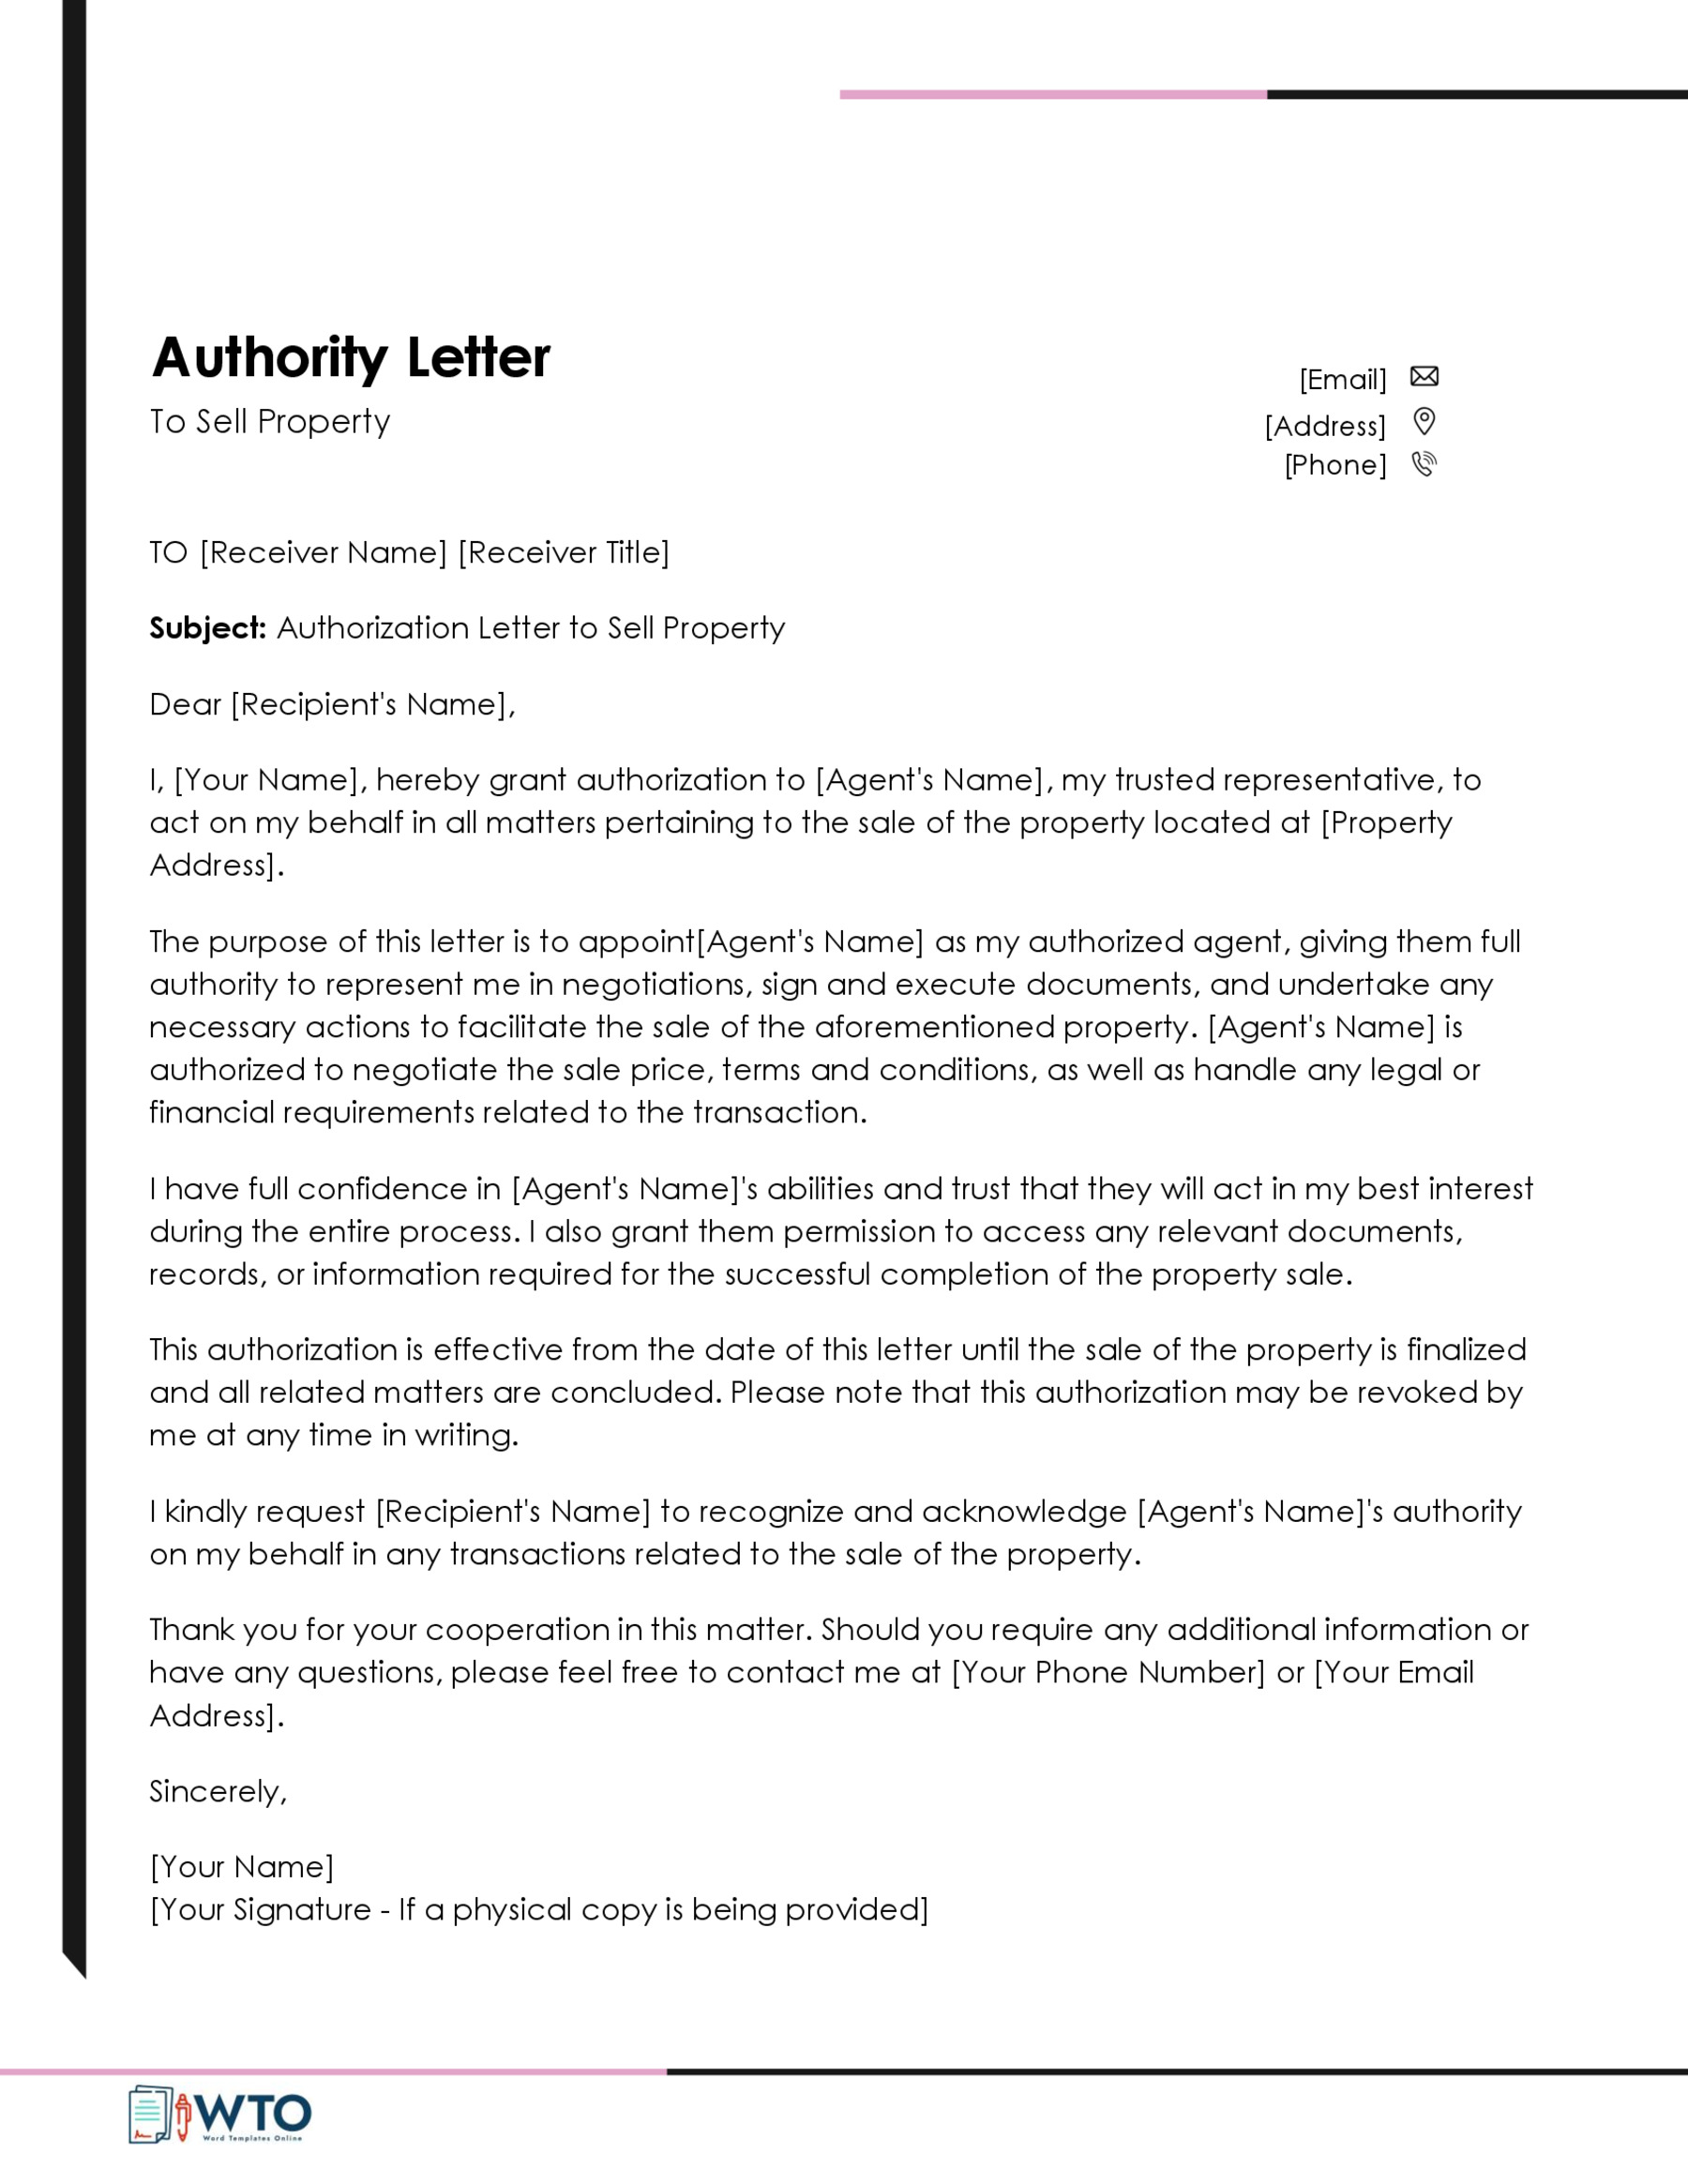 Authorization Letter to Sell Property-Free download in ms word